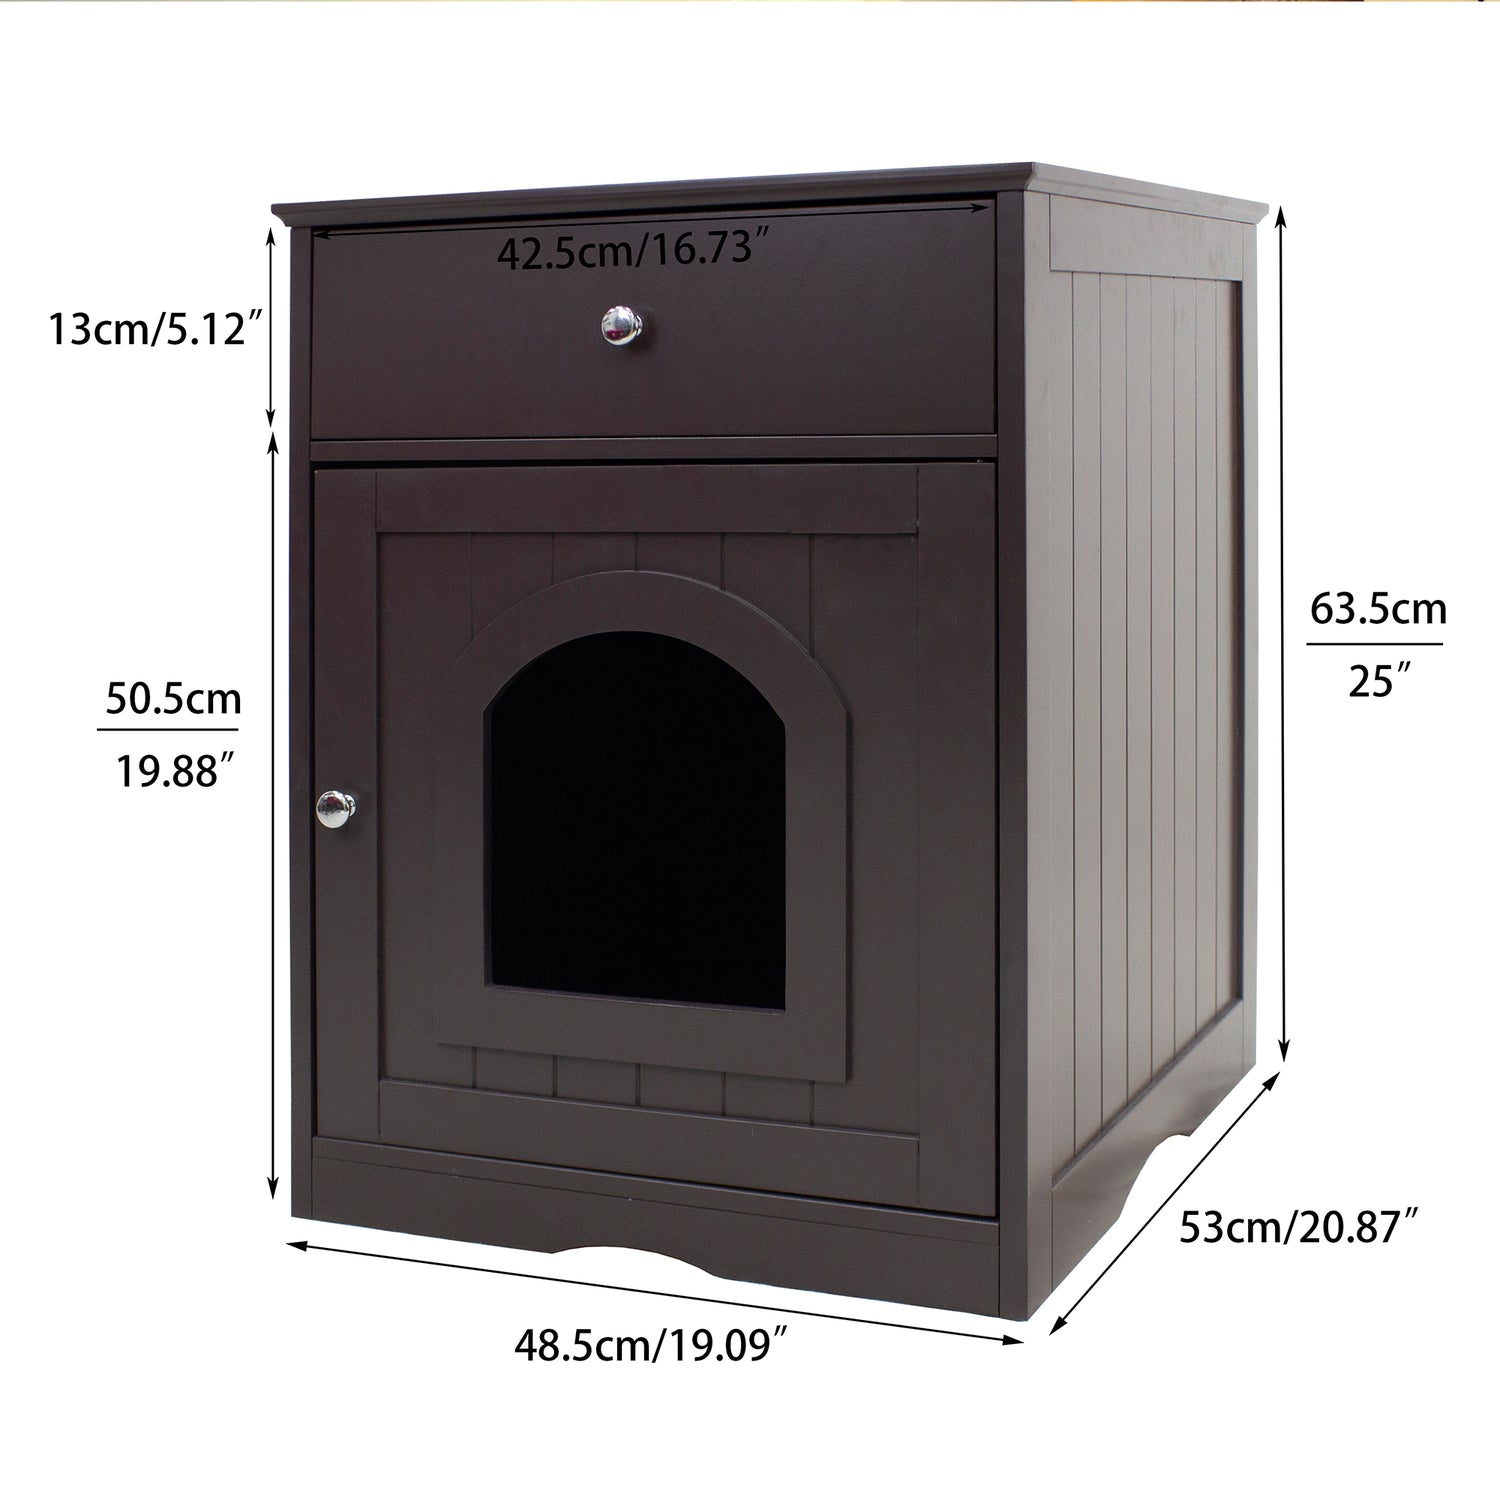 Livego Cat Litter Box Enclosure Furniture Hidden, Wooden Pet Crate Indoor Cat House, Decorative Cat House with Drawer & Side Table, Easy Clean, Odor Control